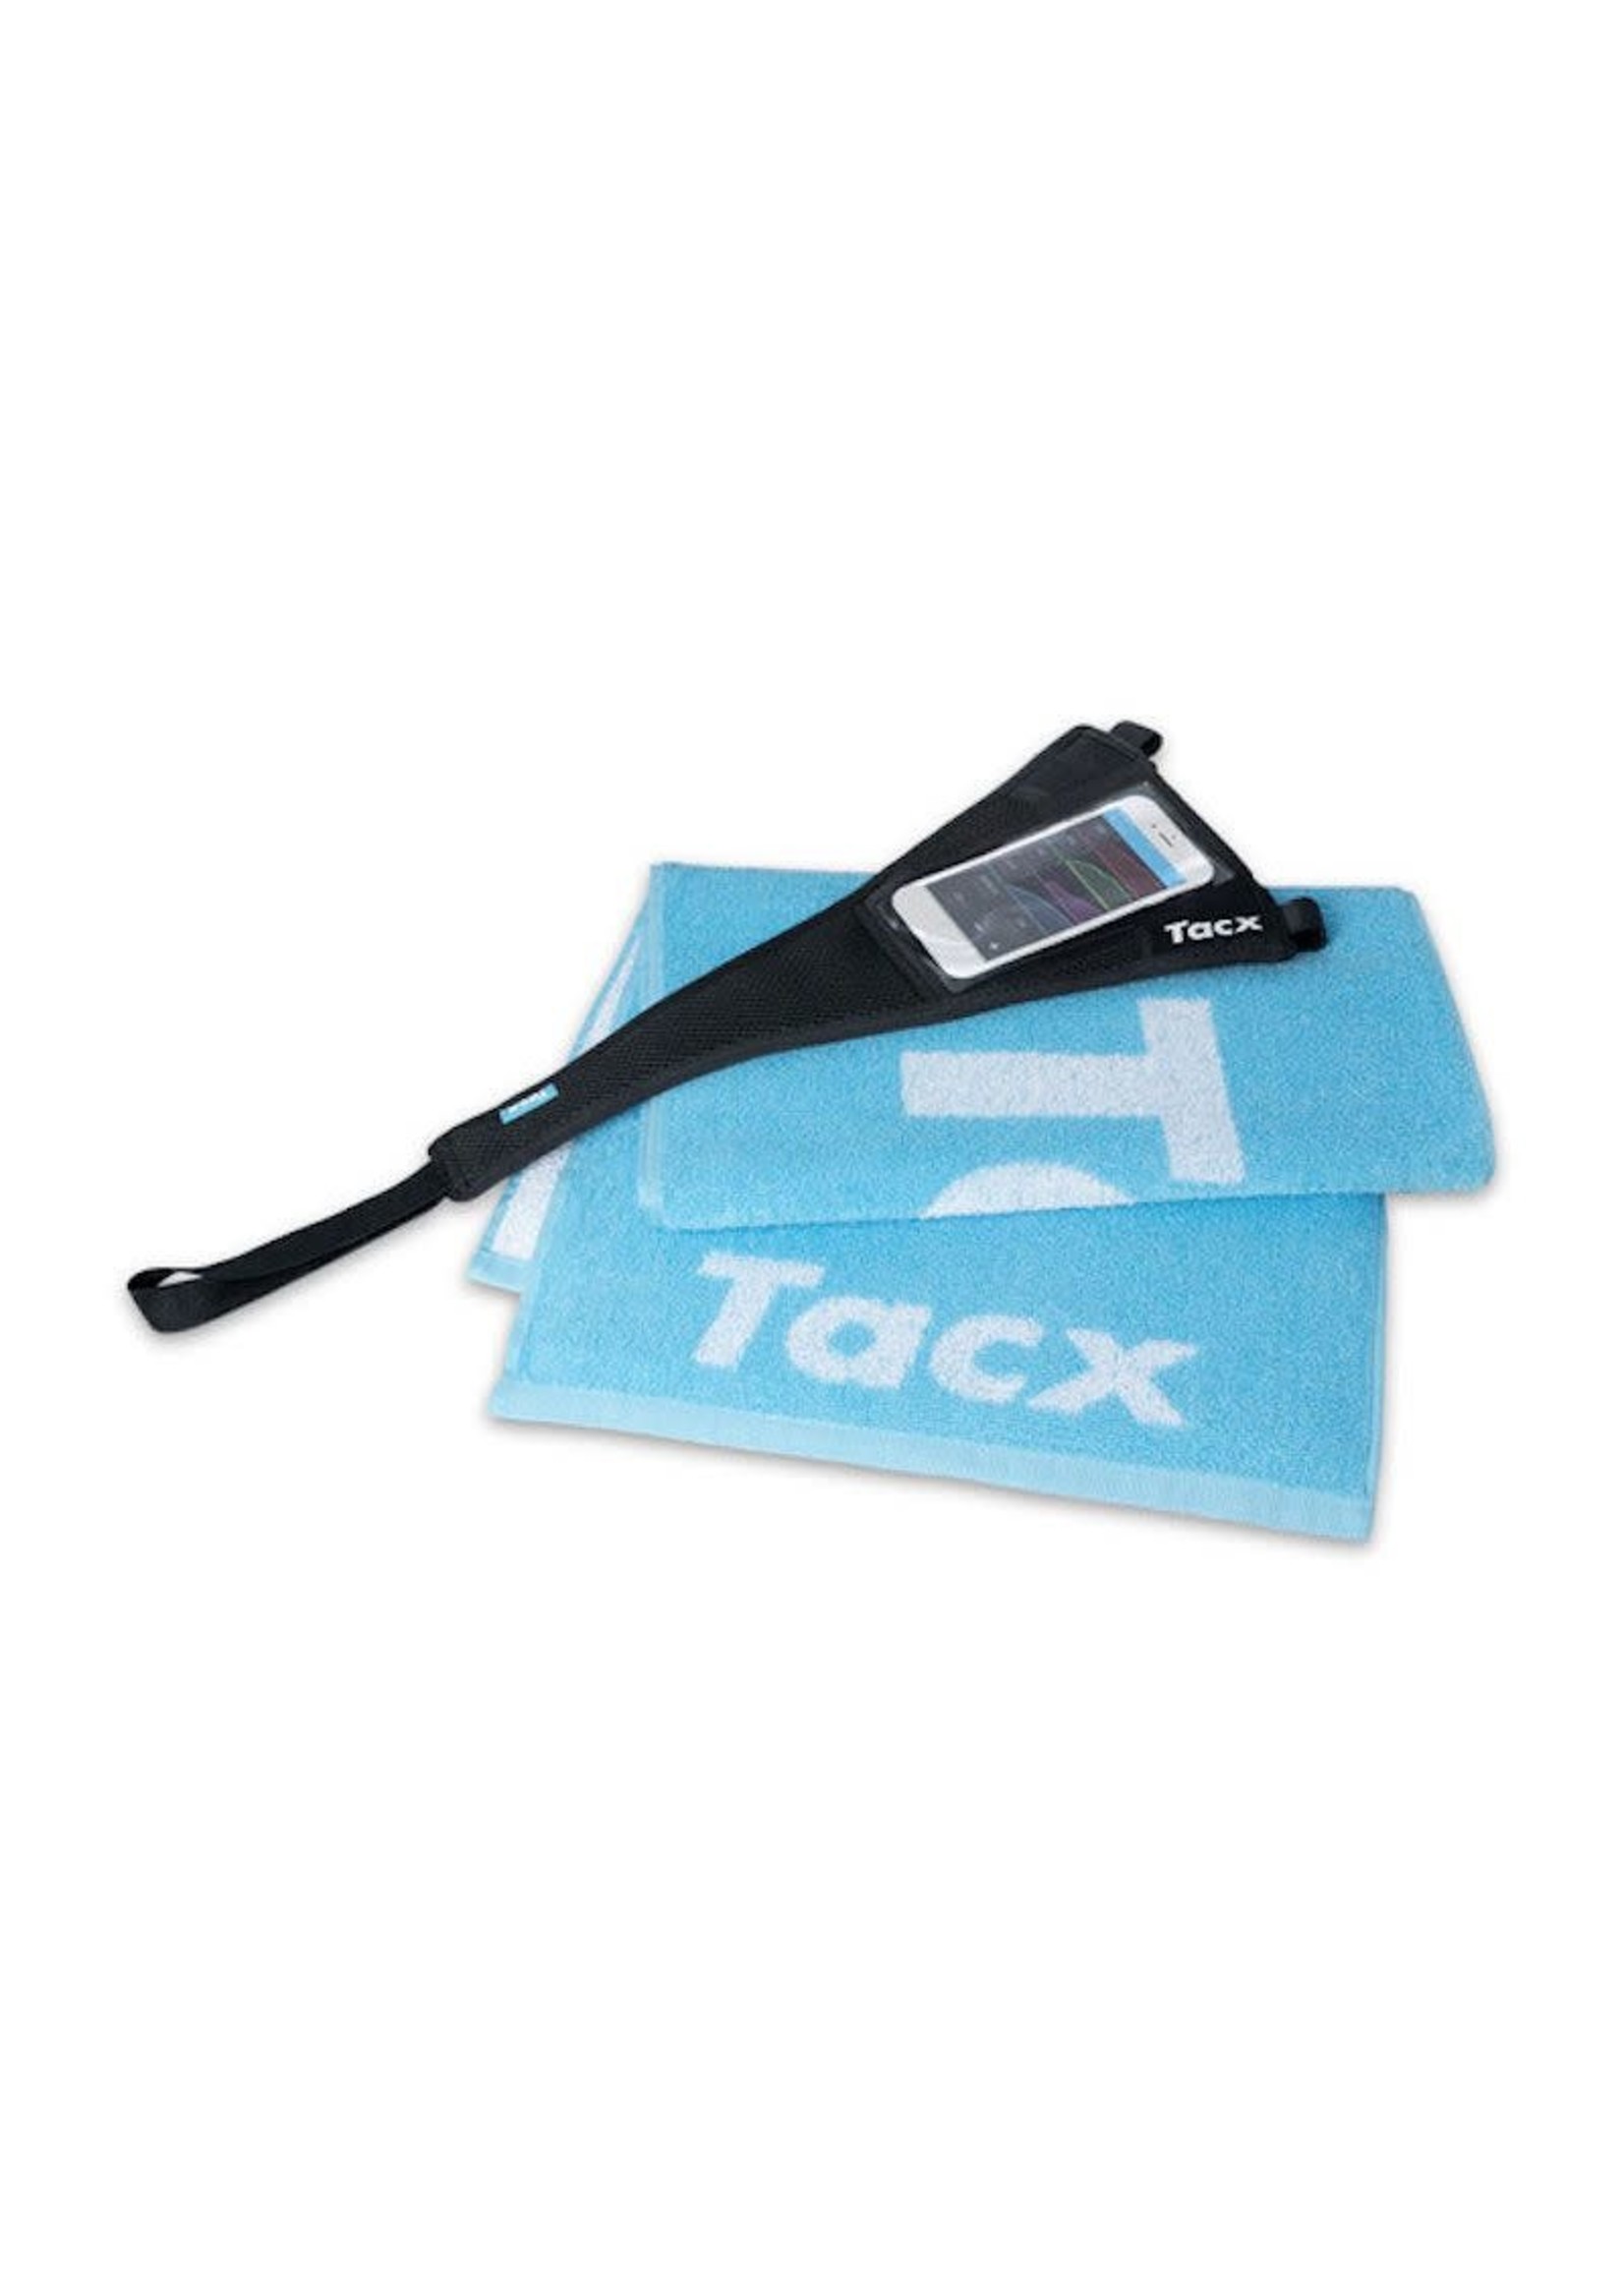 Tacx Tacx Sweat Set (Towel + Sweat Cover For Smartphone):